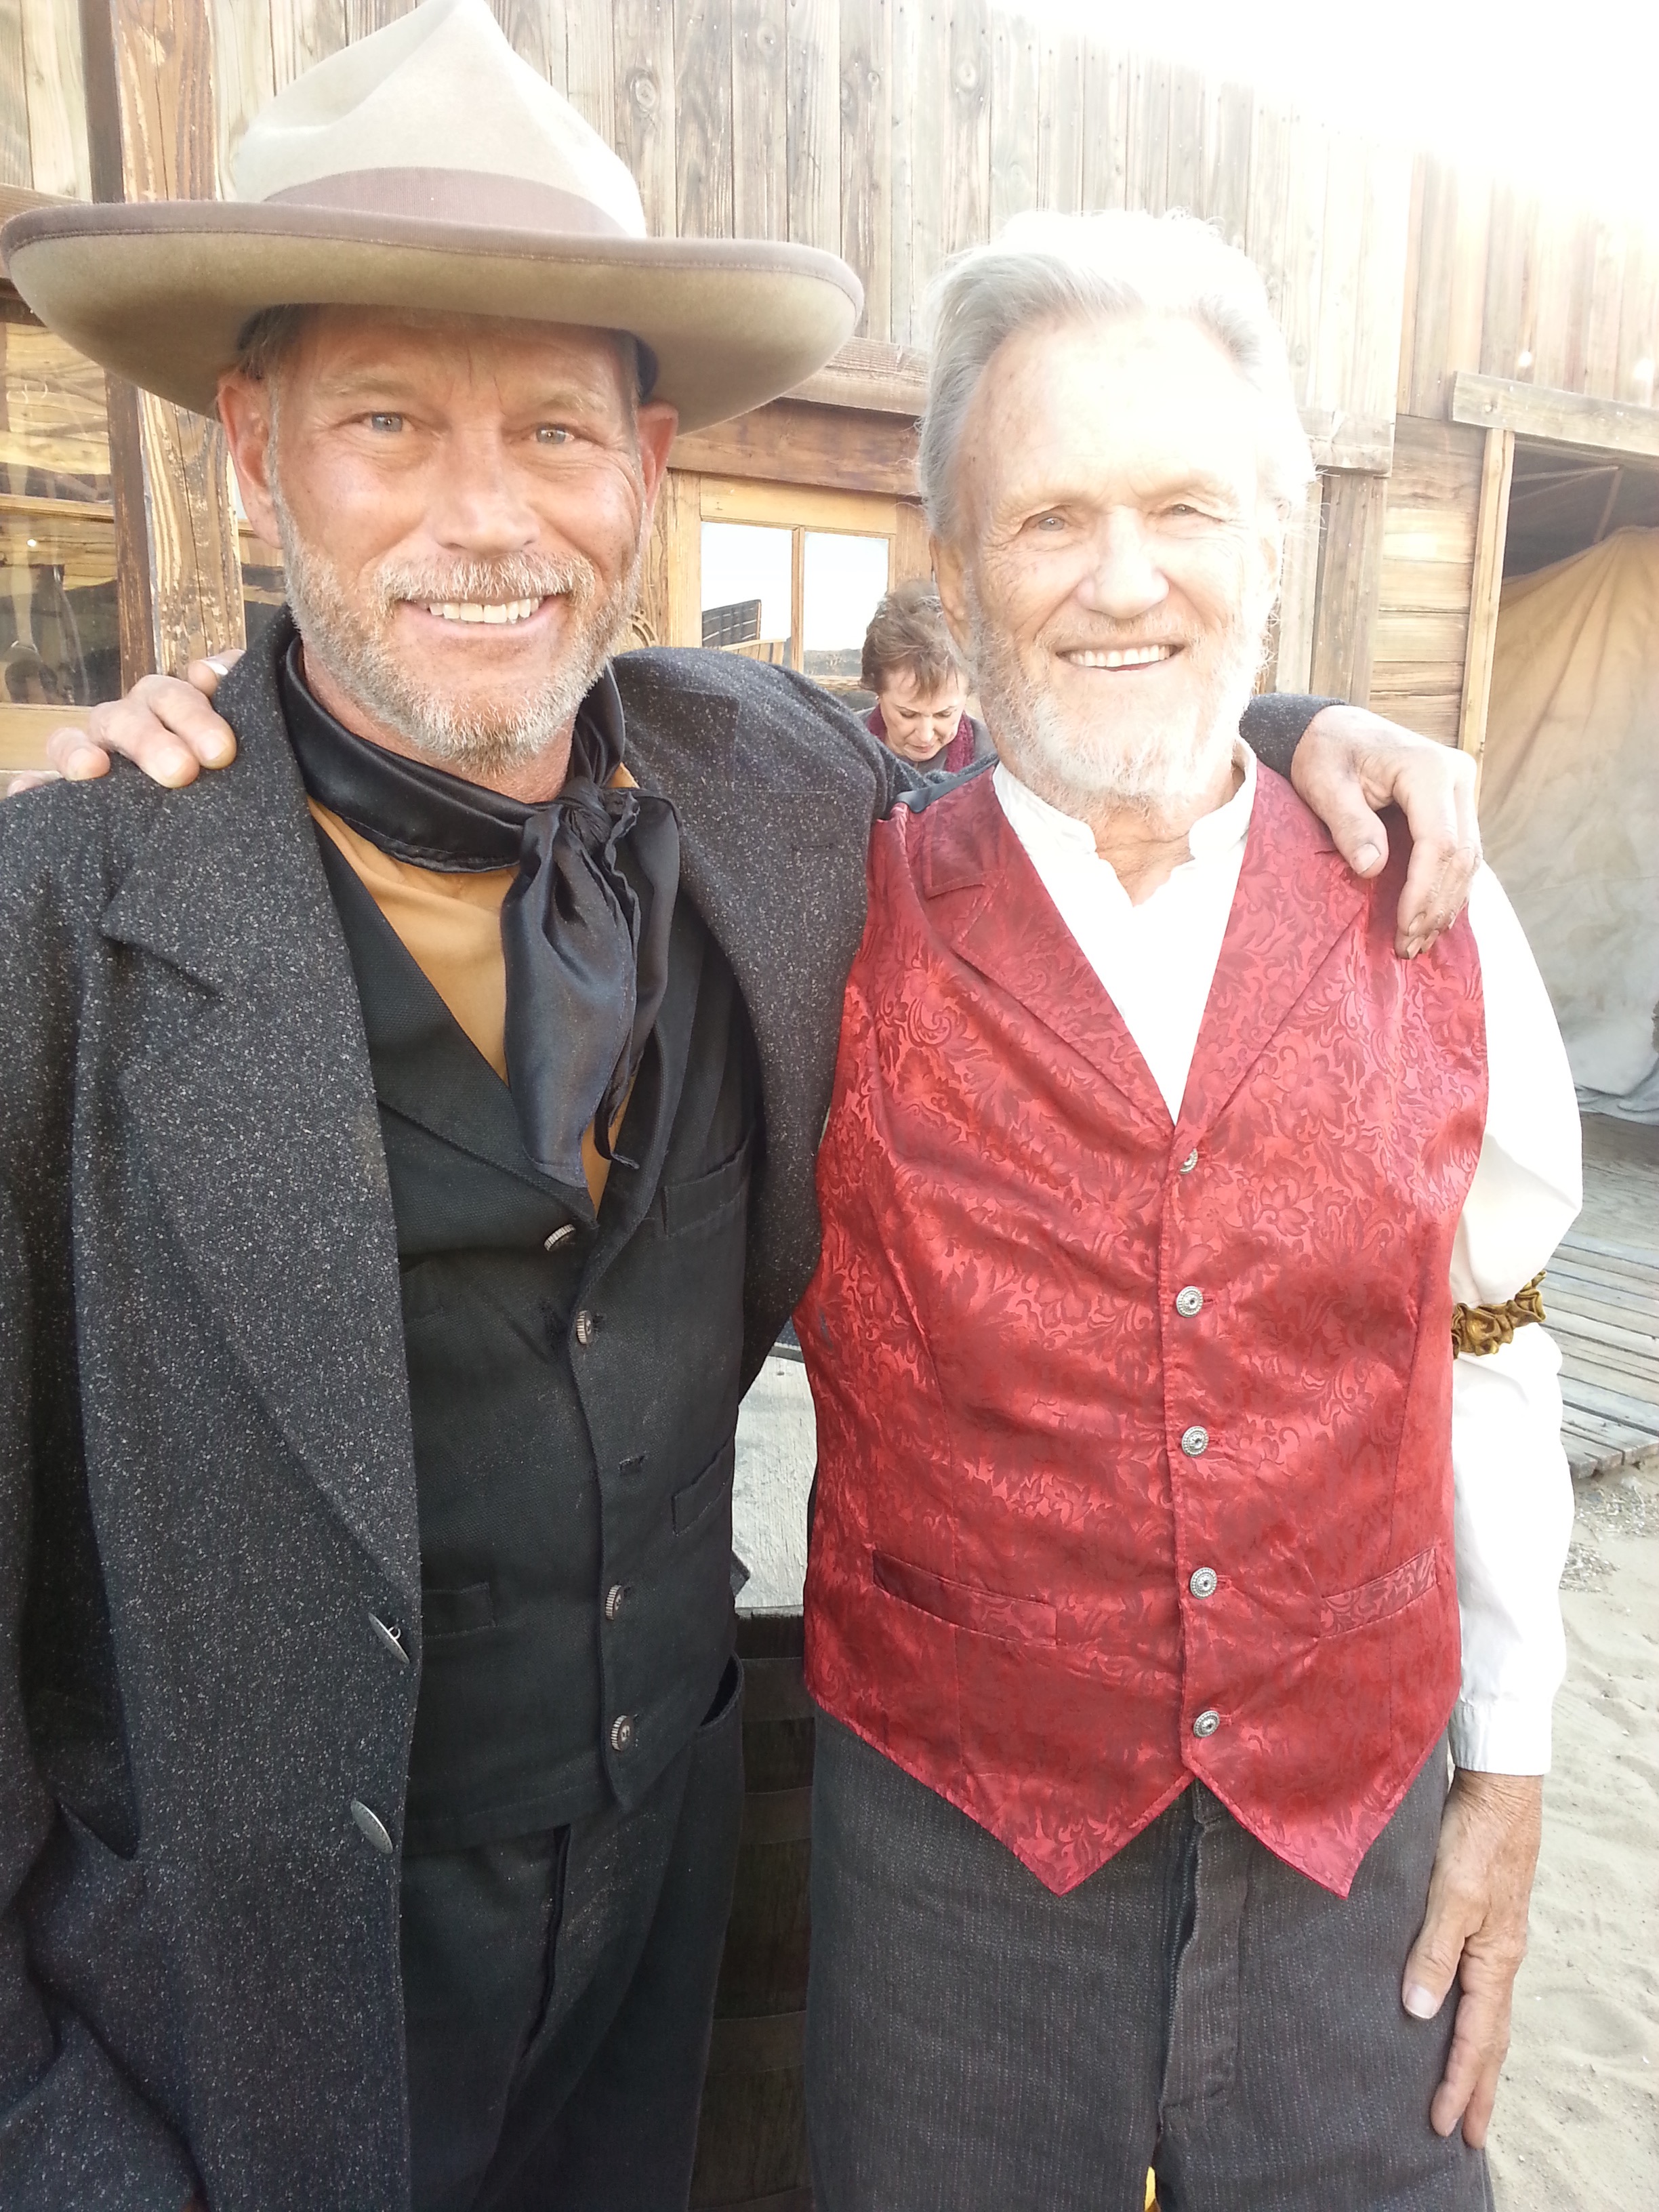 Stephen Brown and Kris Kristofferson on the set of Traded.